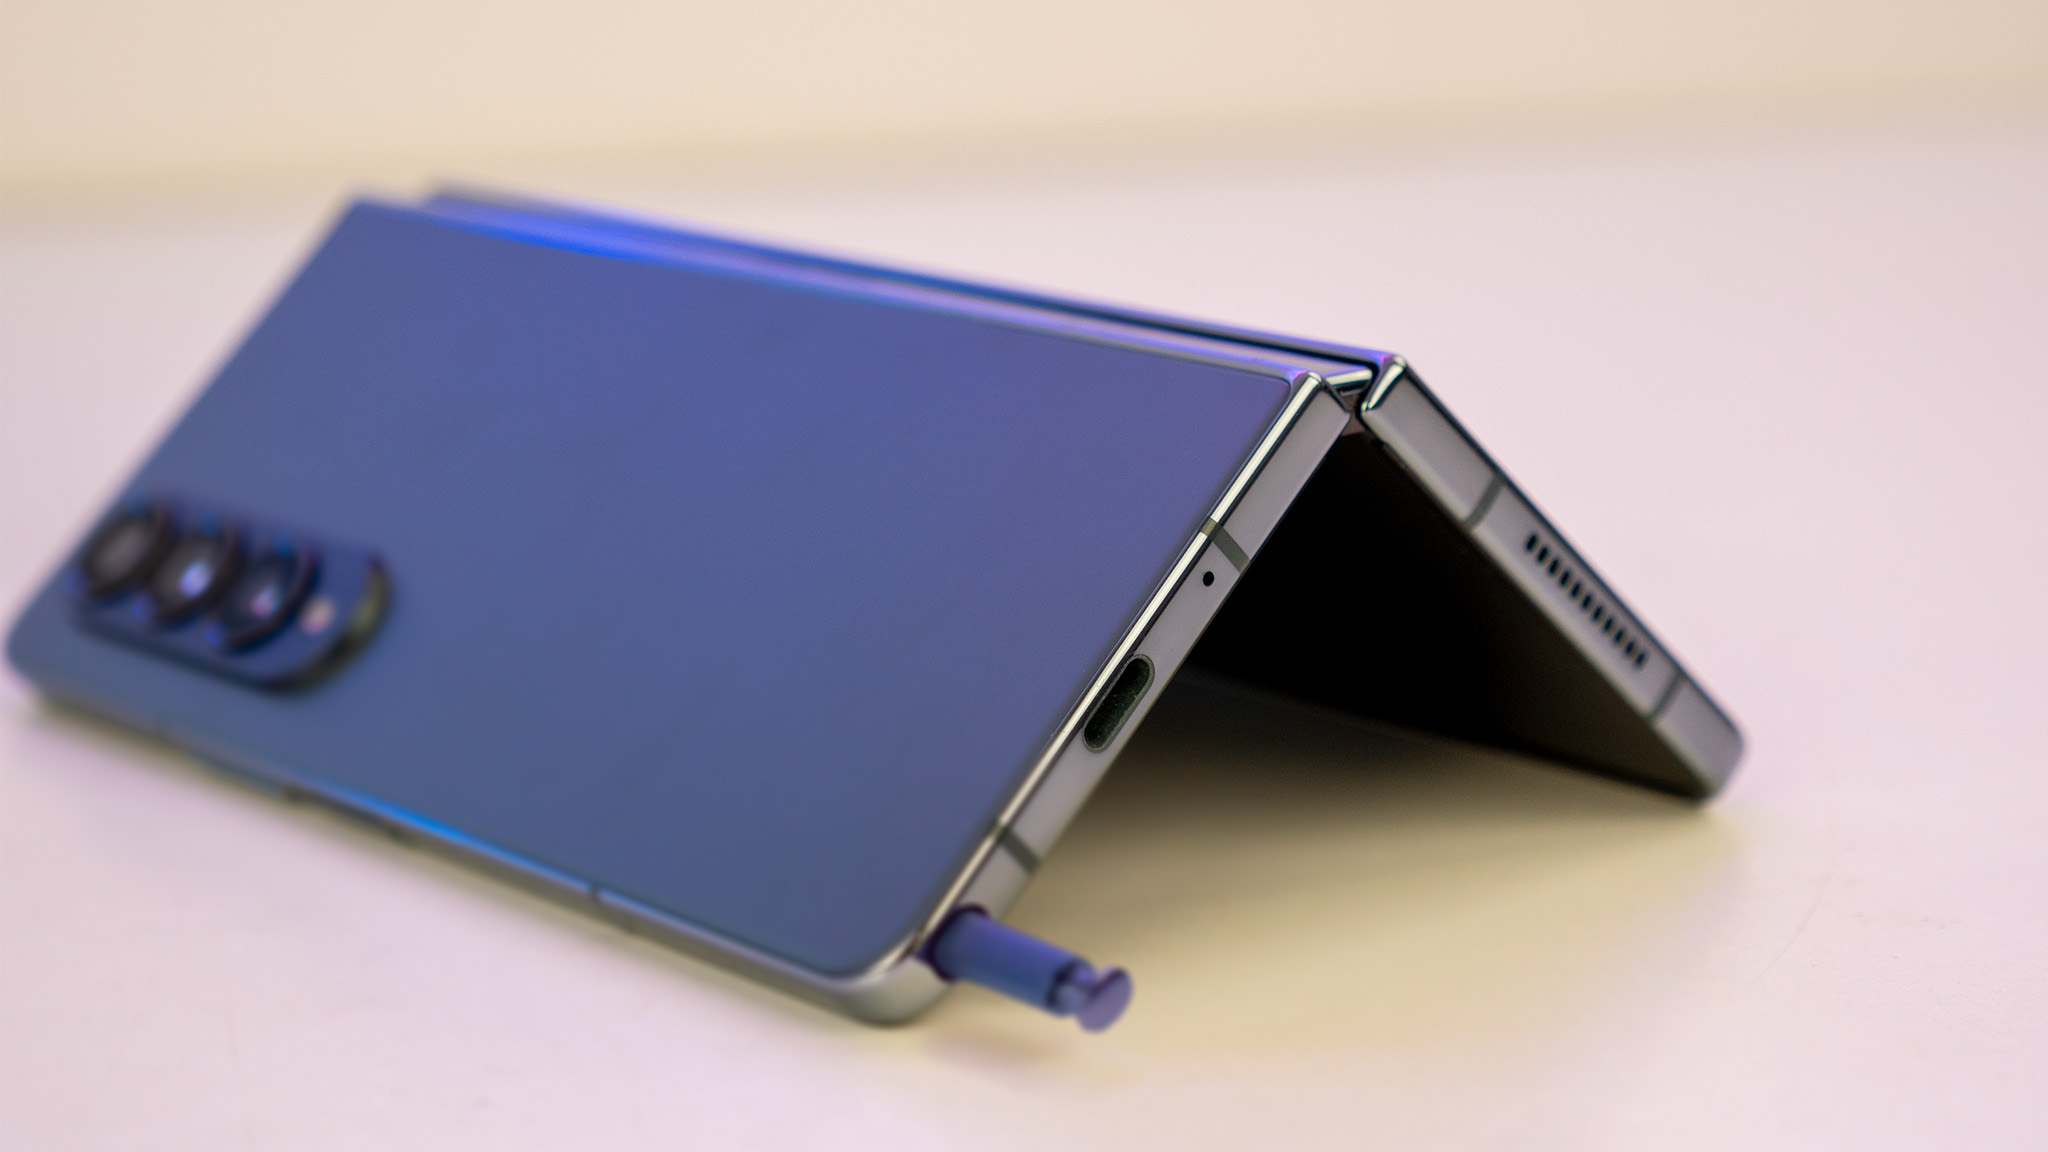 A mockup of what the Samsung Galaxy Z Fold 5 could look like if it had a built-in S Pen